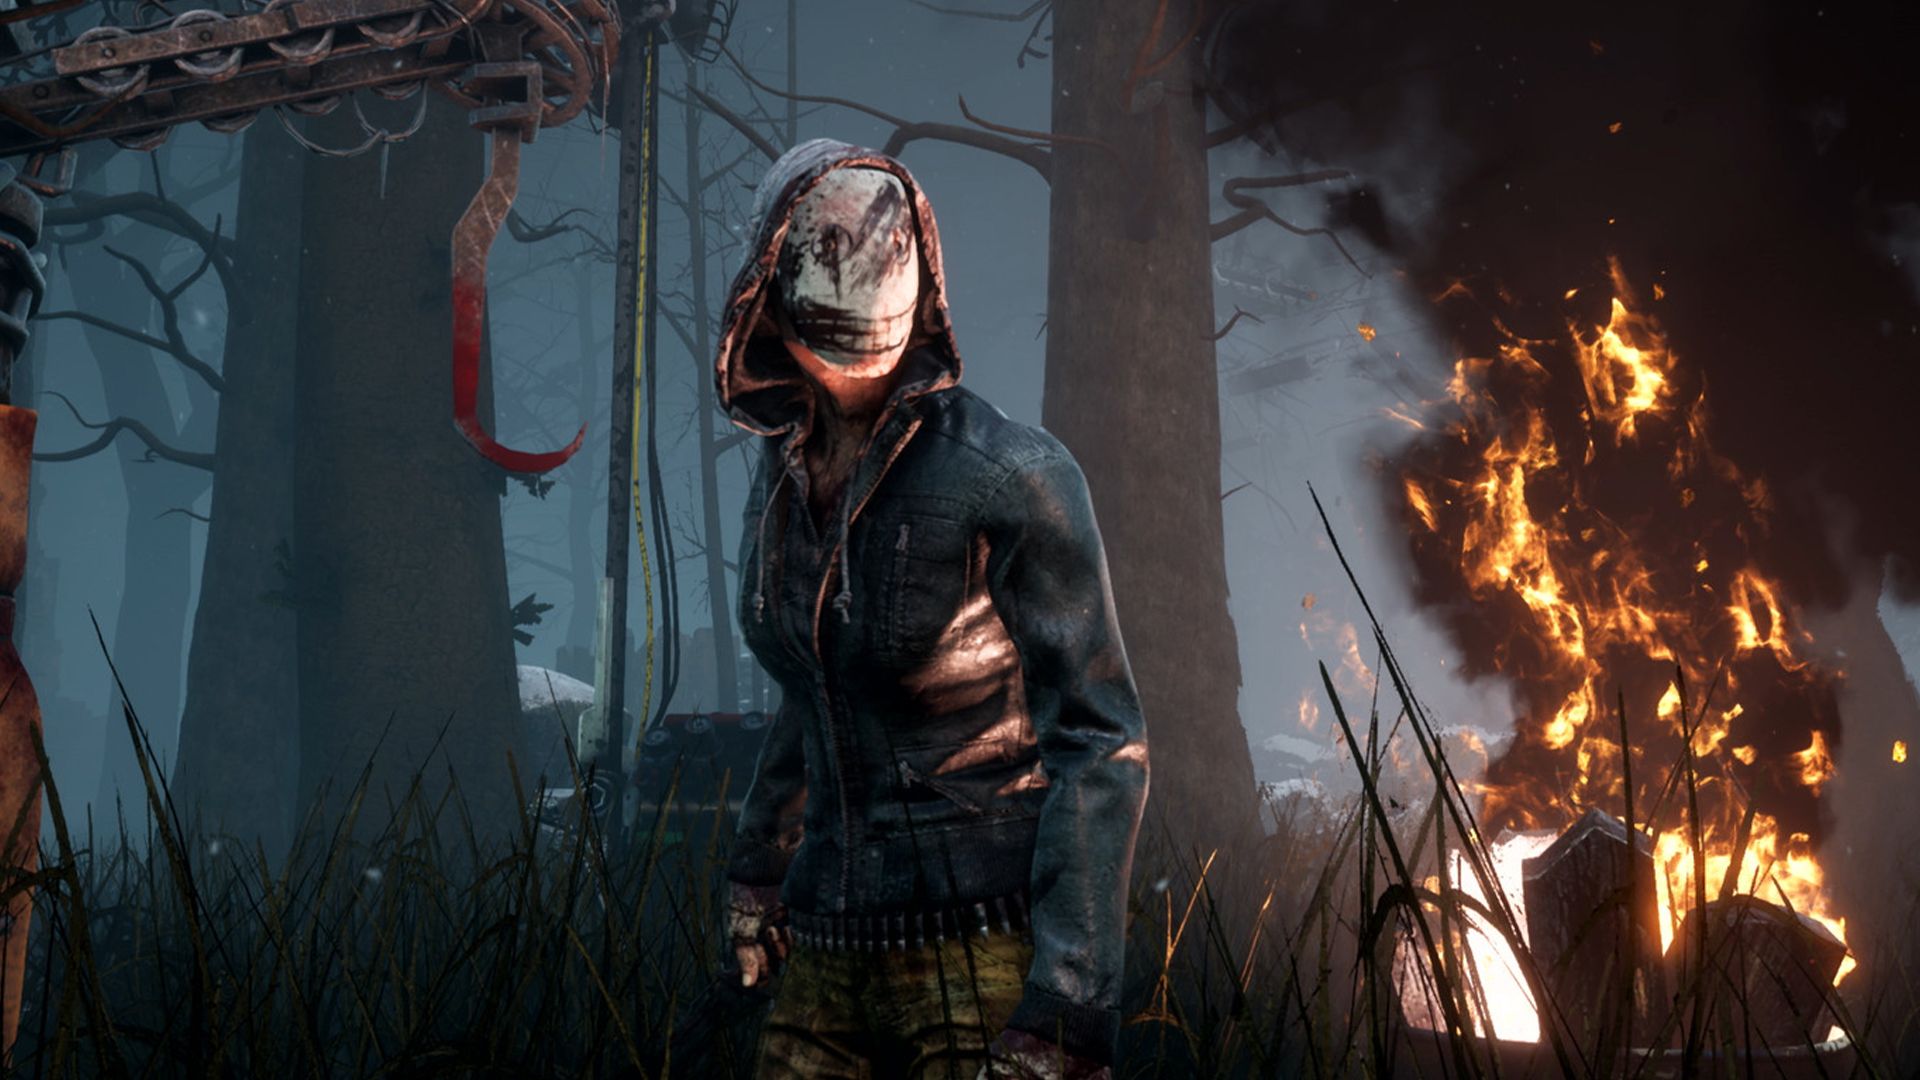 Dead by Daylight has a new killer today - a legion of murderous teens.